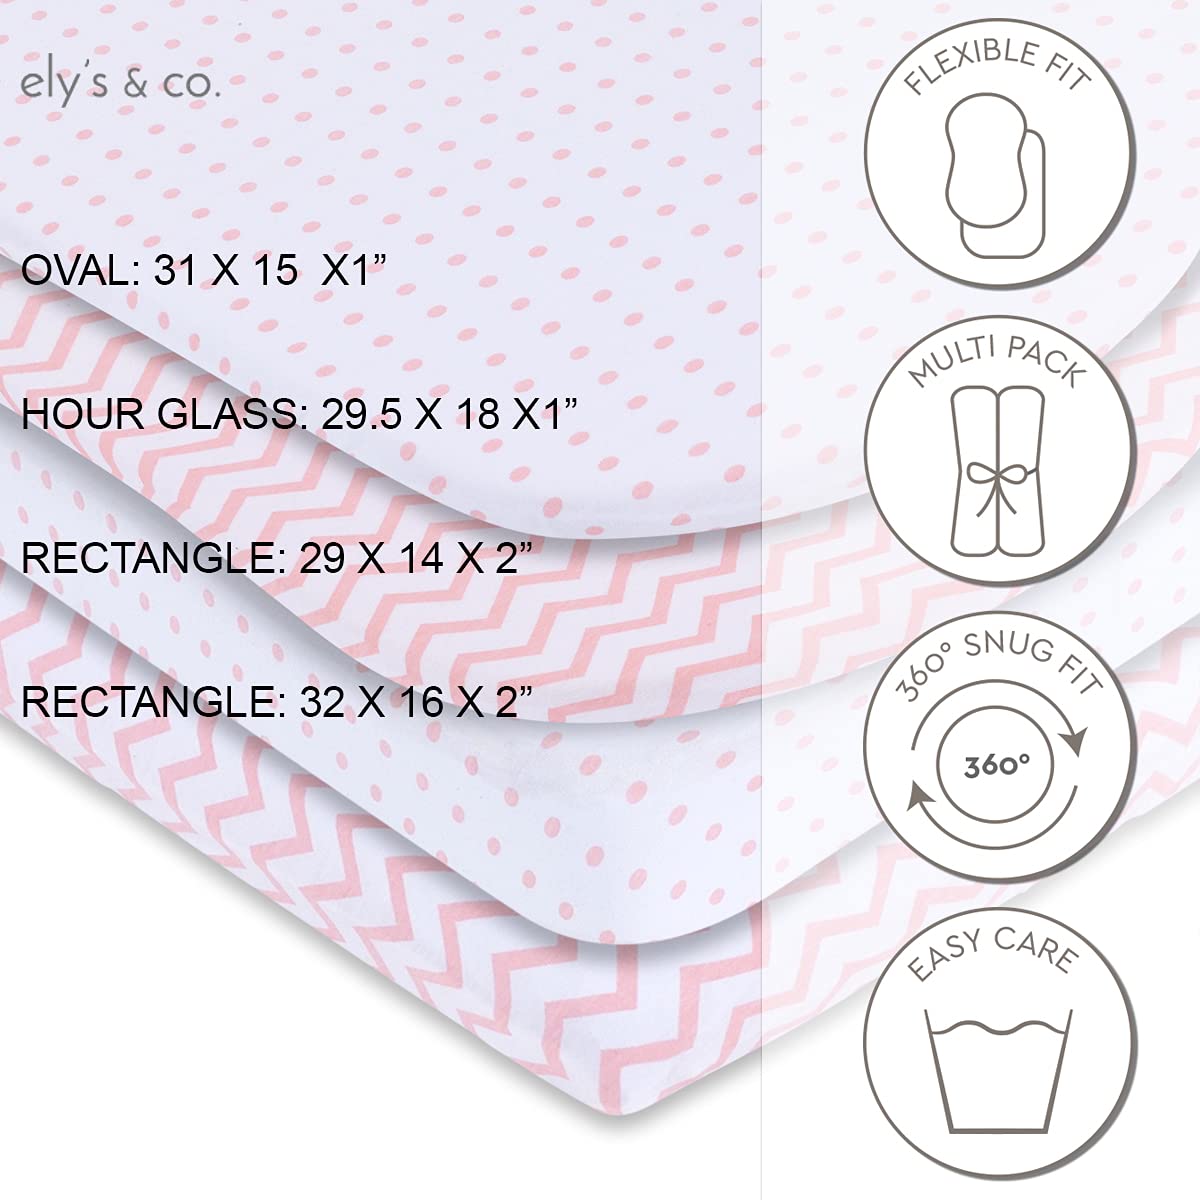 Bassinet Sheet Set 2 Pack 100% Jersey Cotton for Baby Girl by Ely's & Co. - Pink Chevron and Polka Dot by Ely's & Co. - (For 8 piece(s))